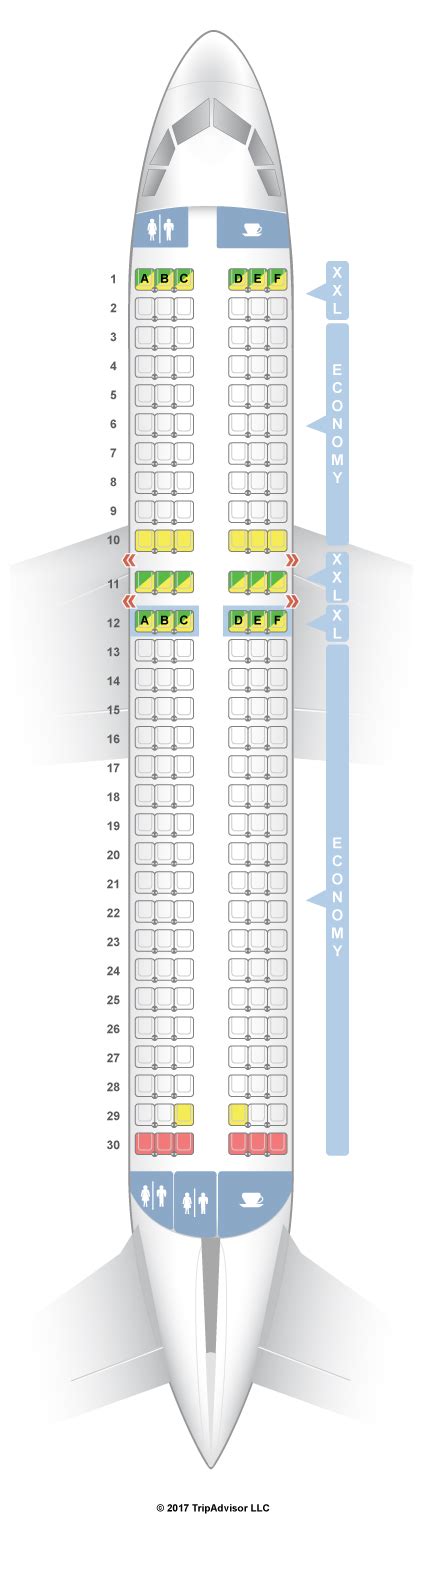 Aircraft Airbus A320neo Seat Map Image To U